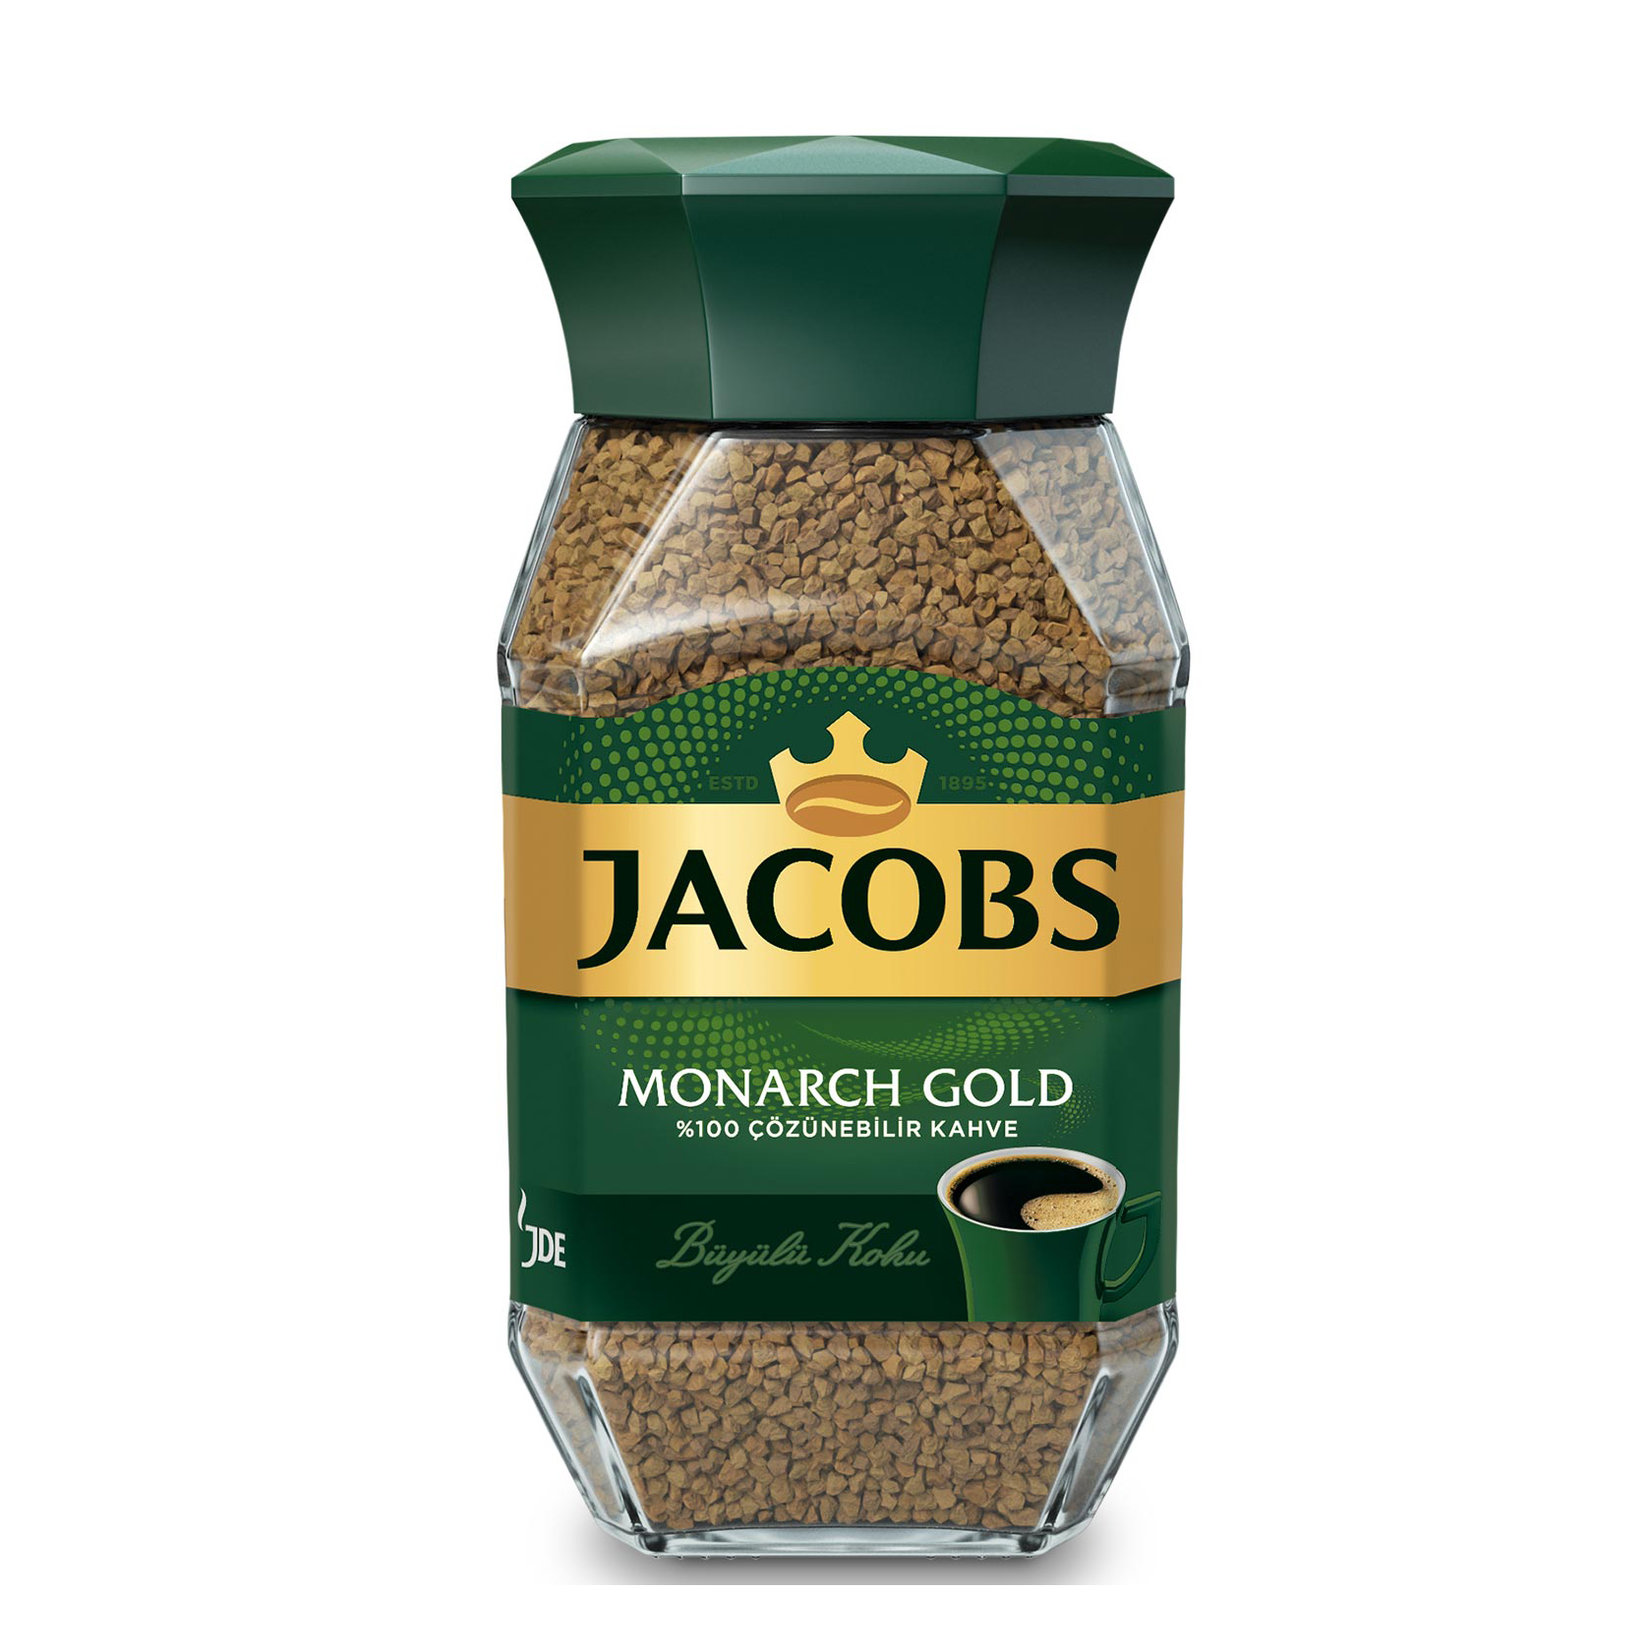 Jacobs Monarch Gold 100 G